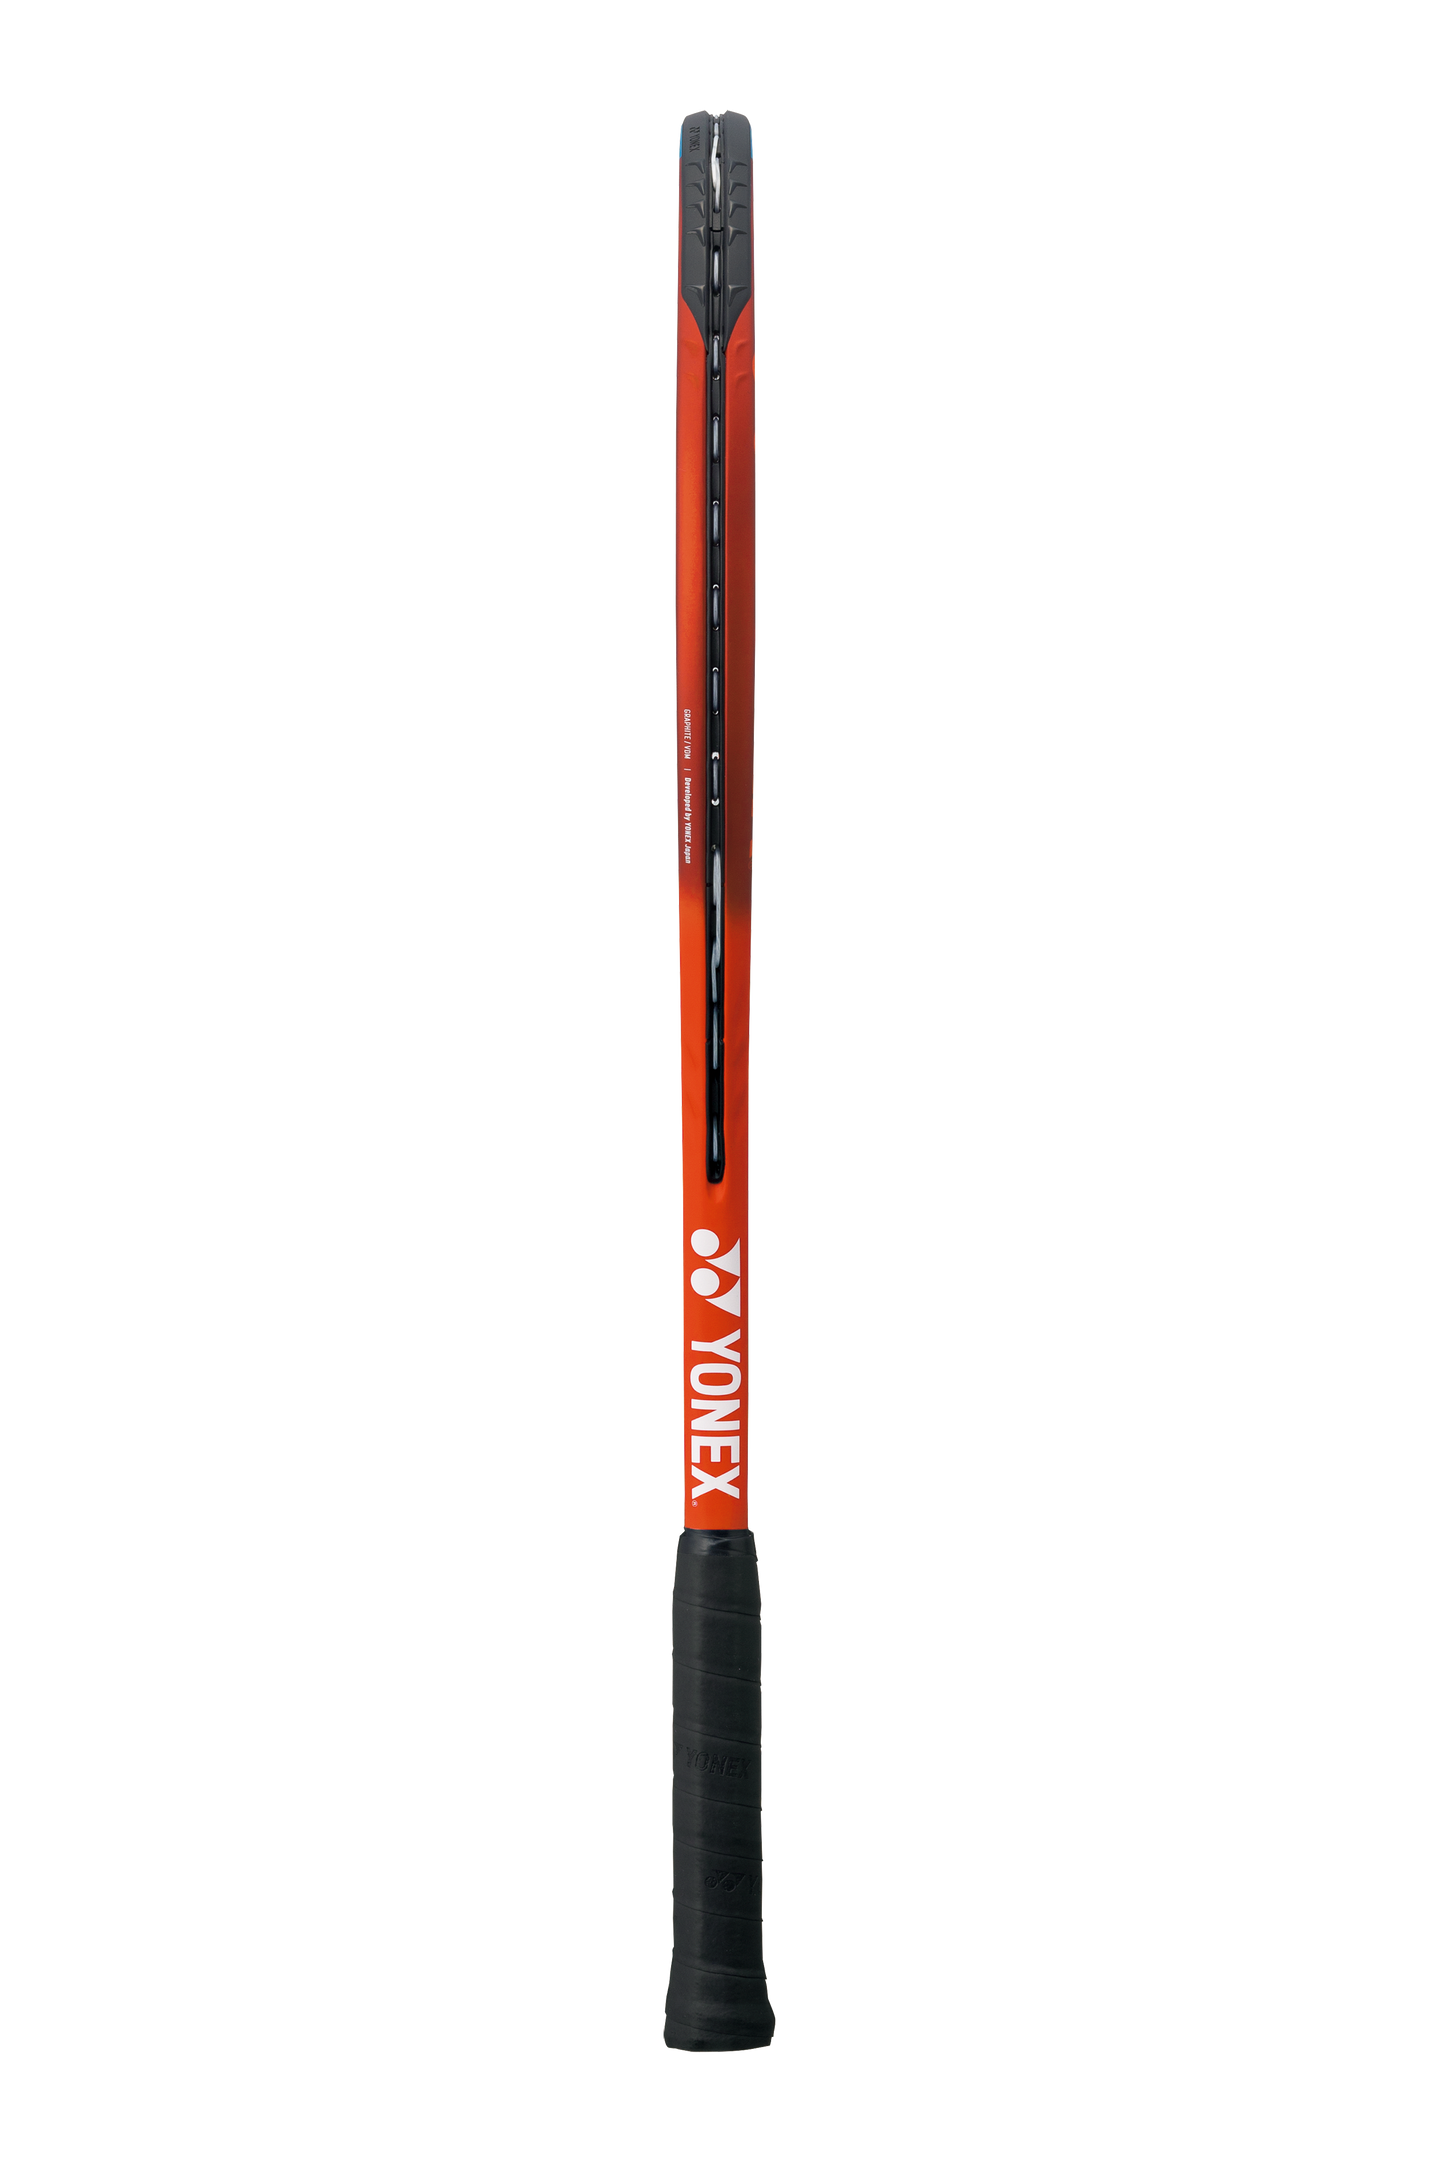 Yonex VCORE 26 in Tango Red for sale at GSM Sports